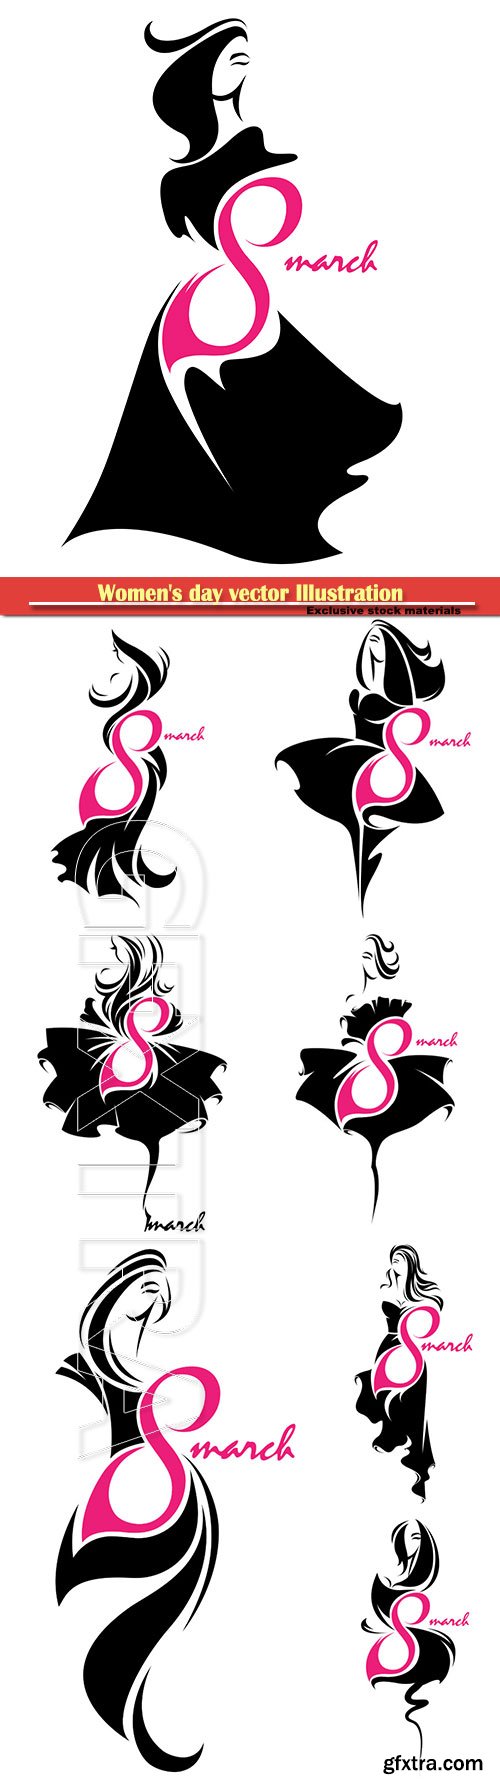 Women\'s day vector Illustration of women silhouette icon